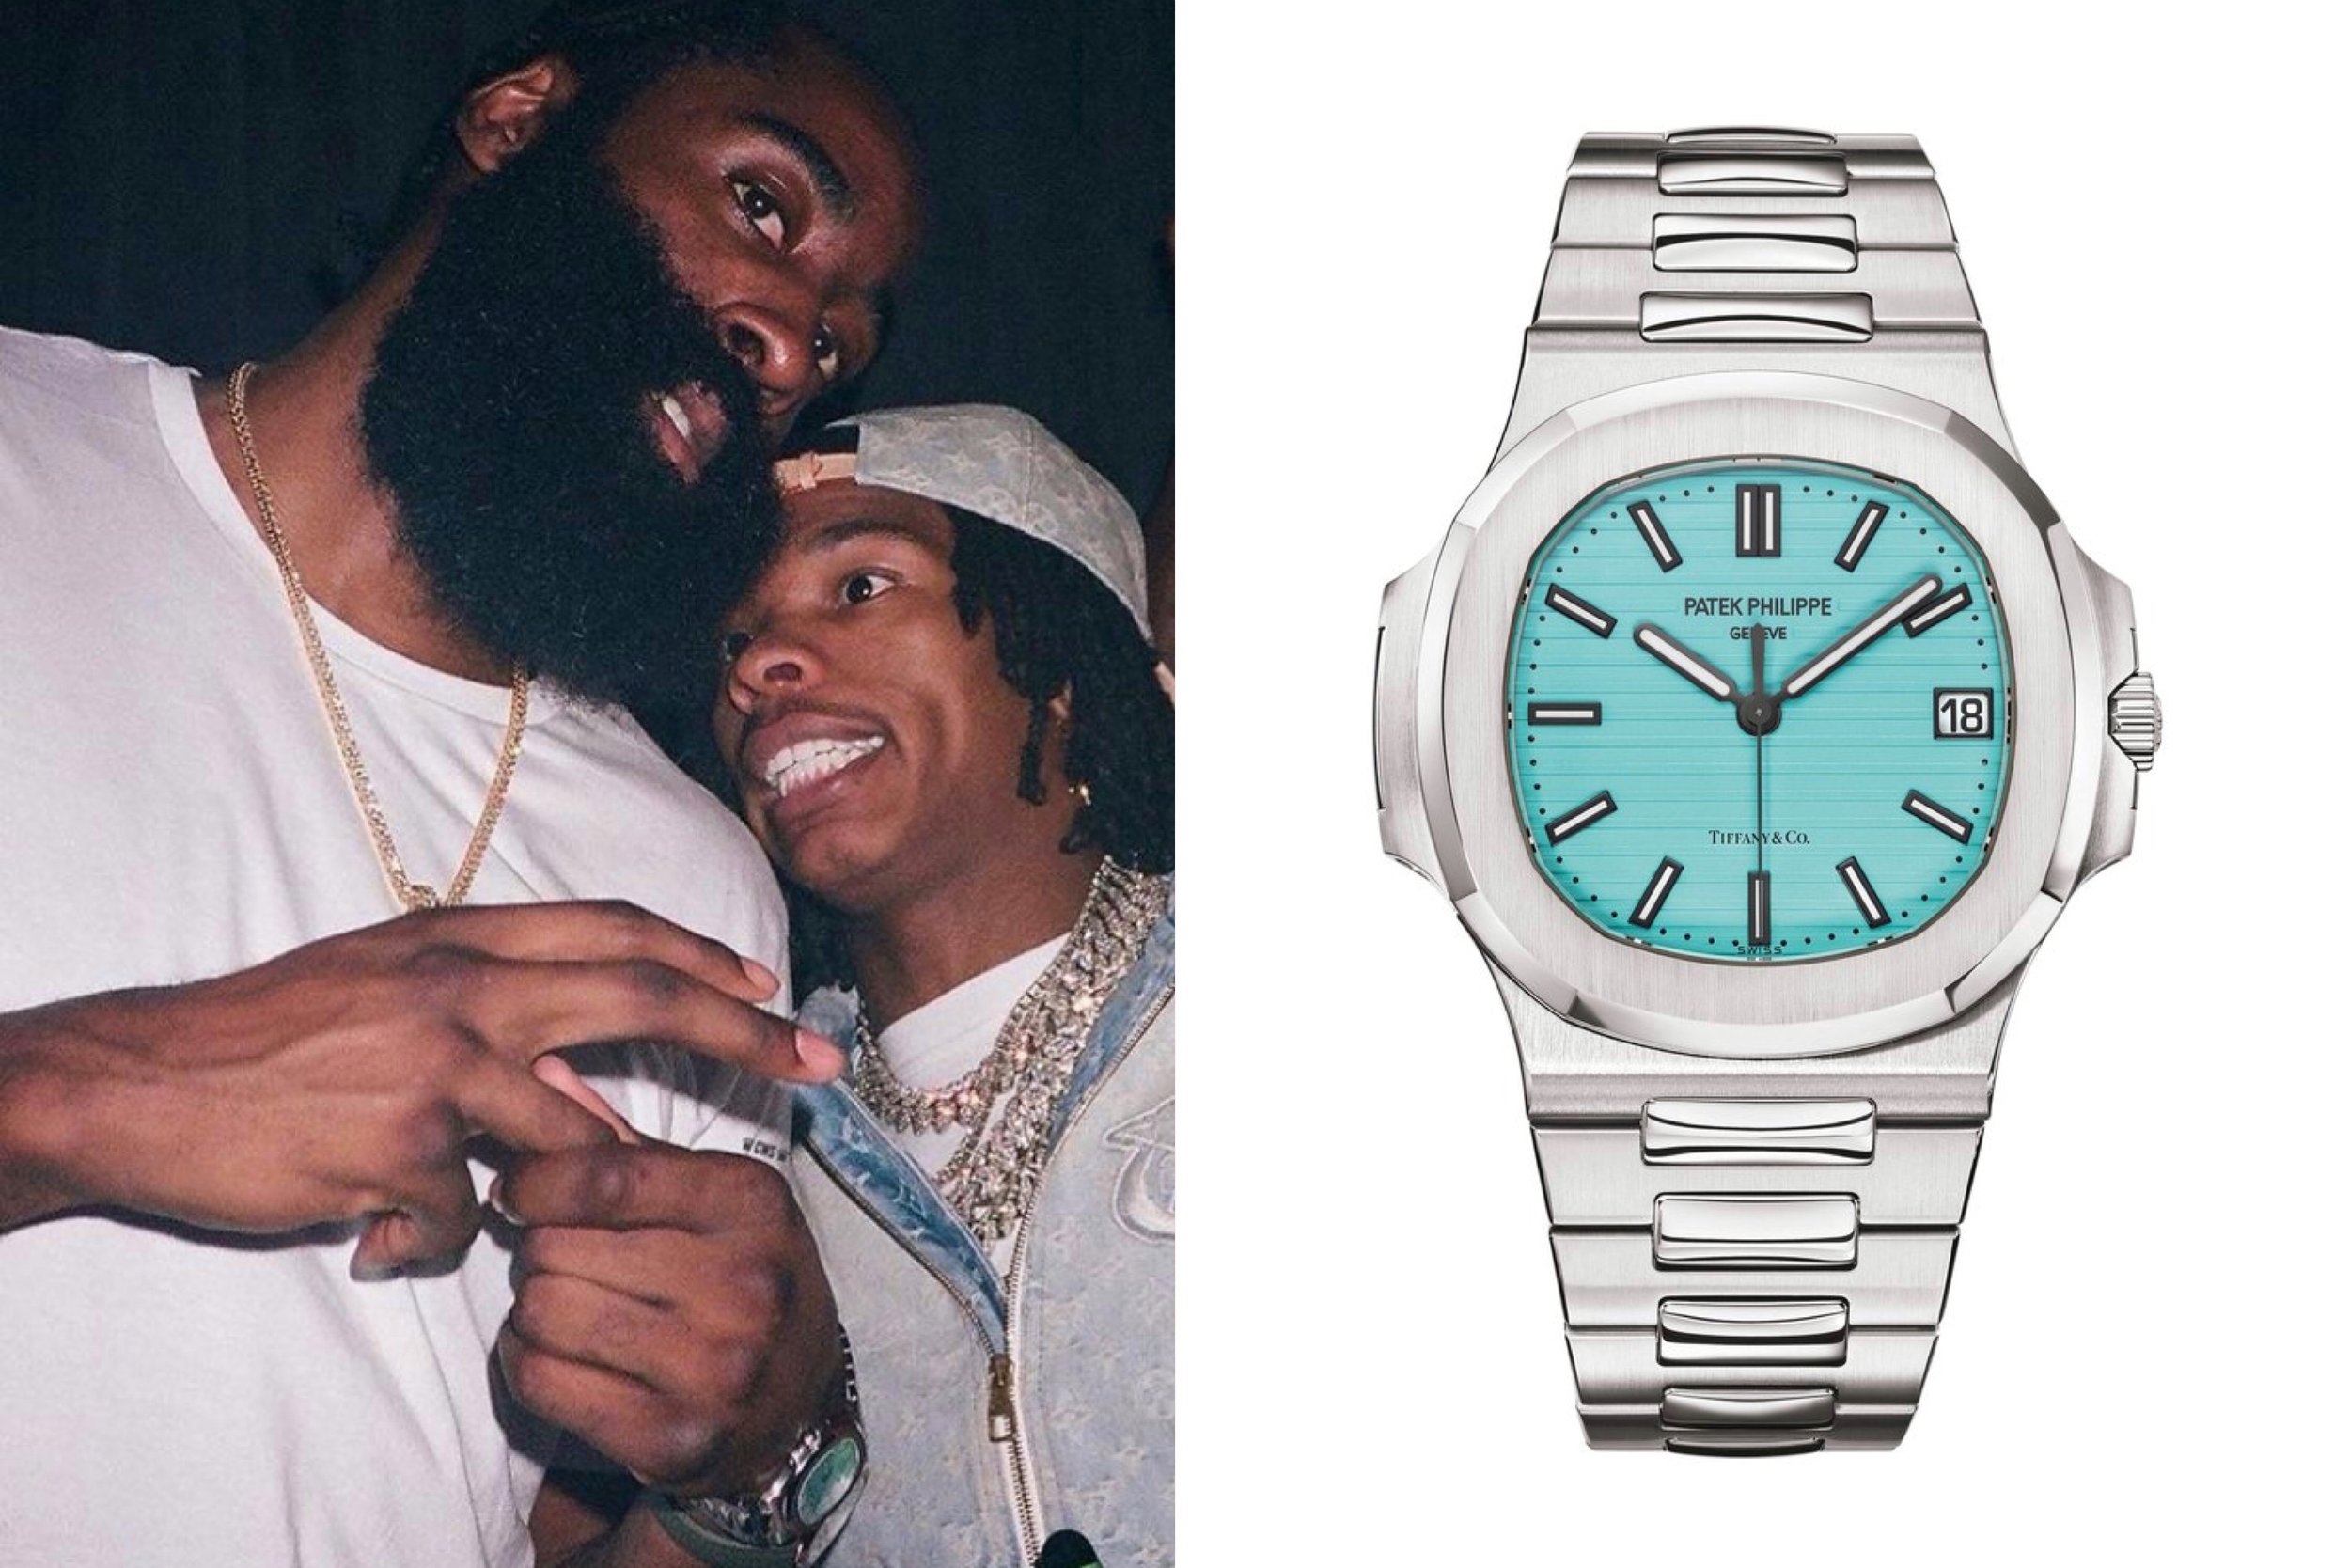 Patek Philippe Making 170 Tiffany Blue Nautilus Watches for $53,000 Each